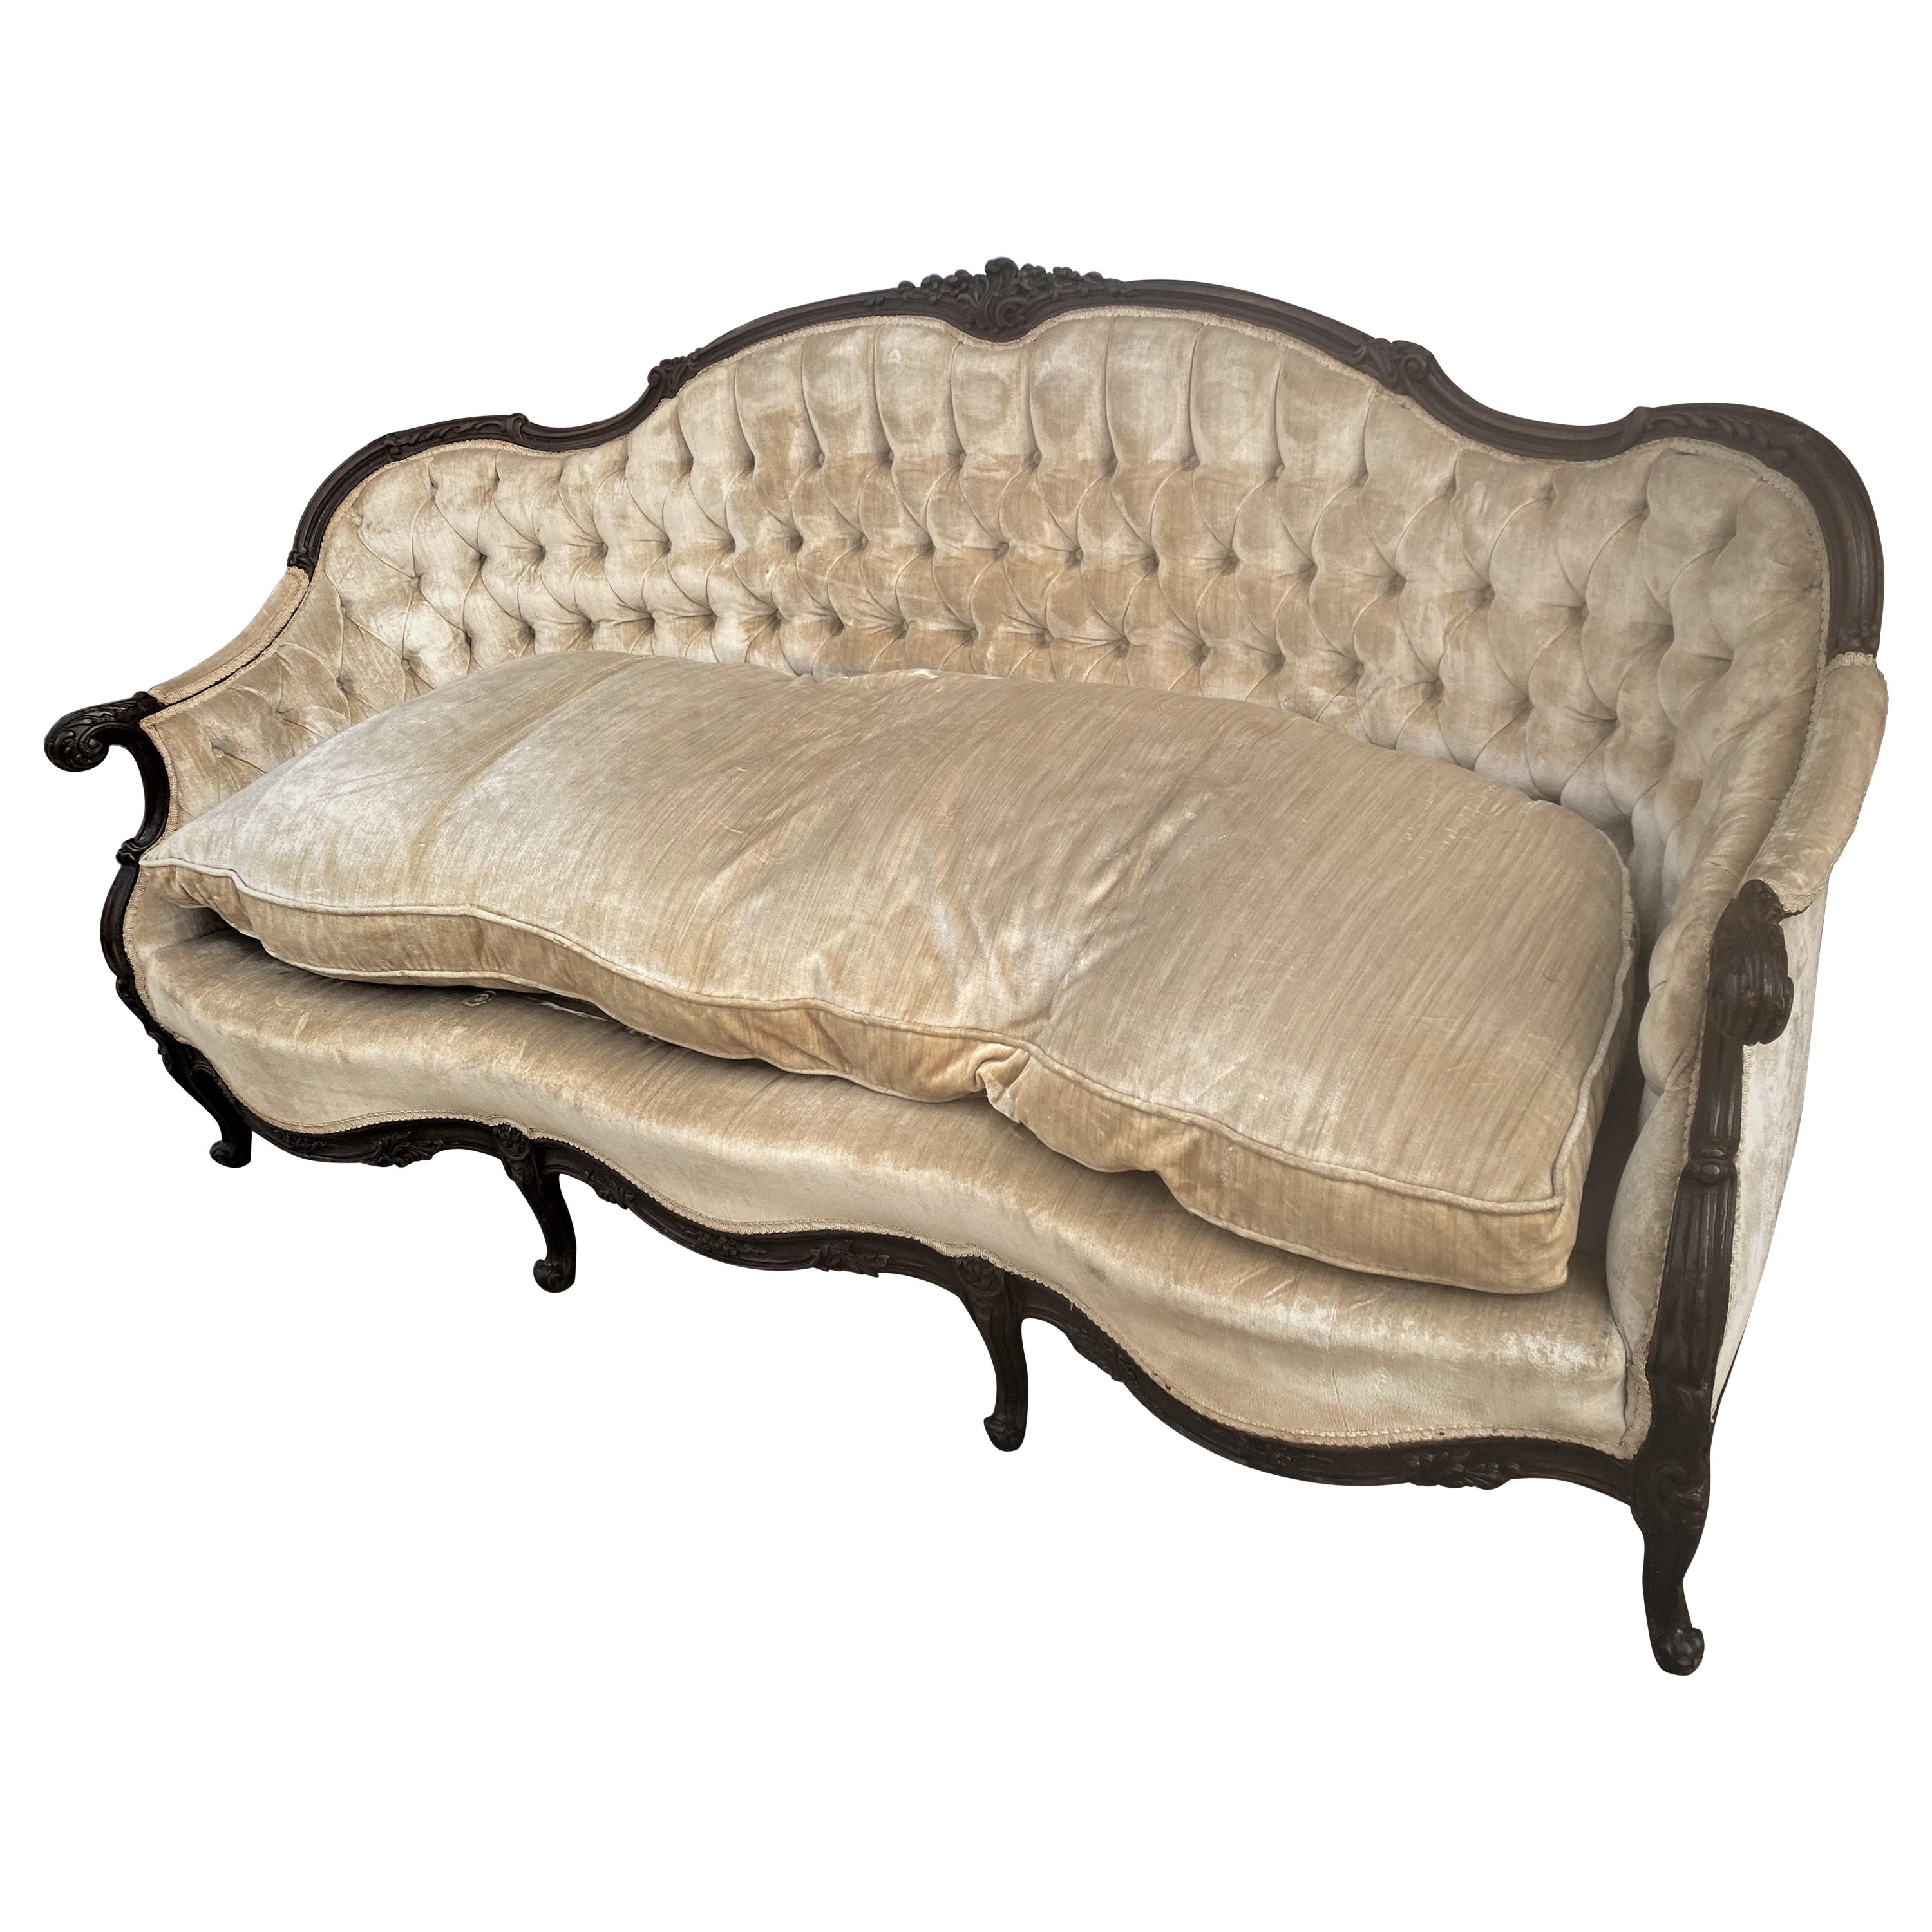 Late 19th Century French Country Long Sofa/Settee With Carved Arms, Legs & Back  For Sale